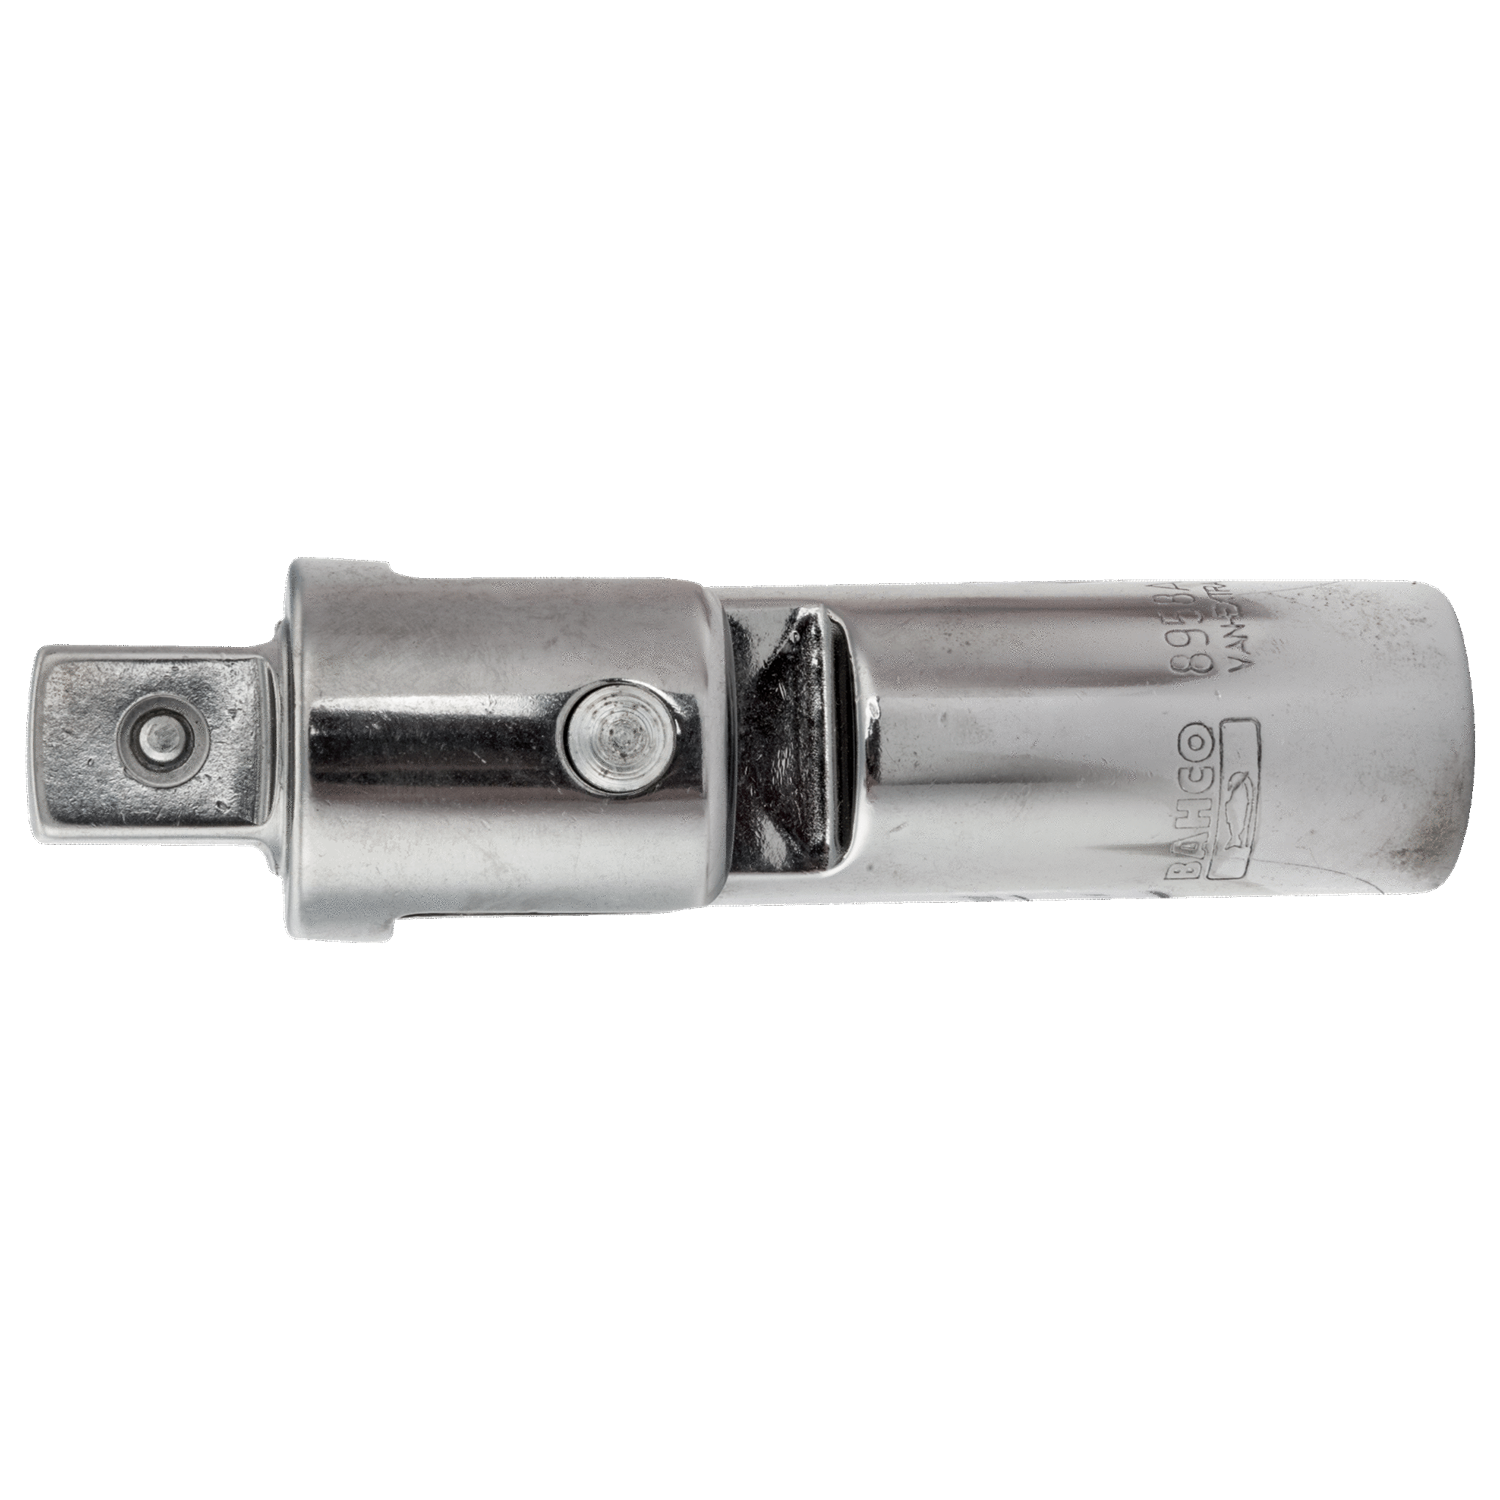 BAHCO 8958A 3/4" Flex Head Spare Breaker Bar Square Drive - Premium 3/4" Flex Head Spare Breaker Bar from BAHCO - Shop now at Yew Aik.